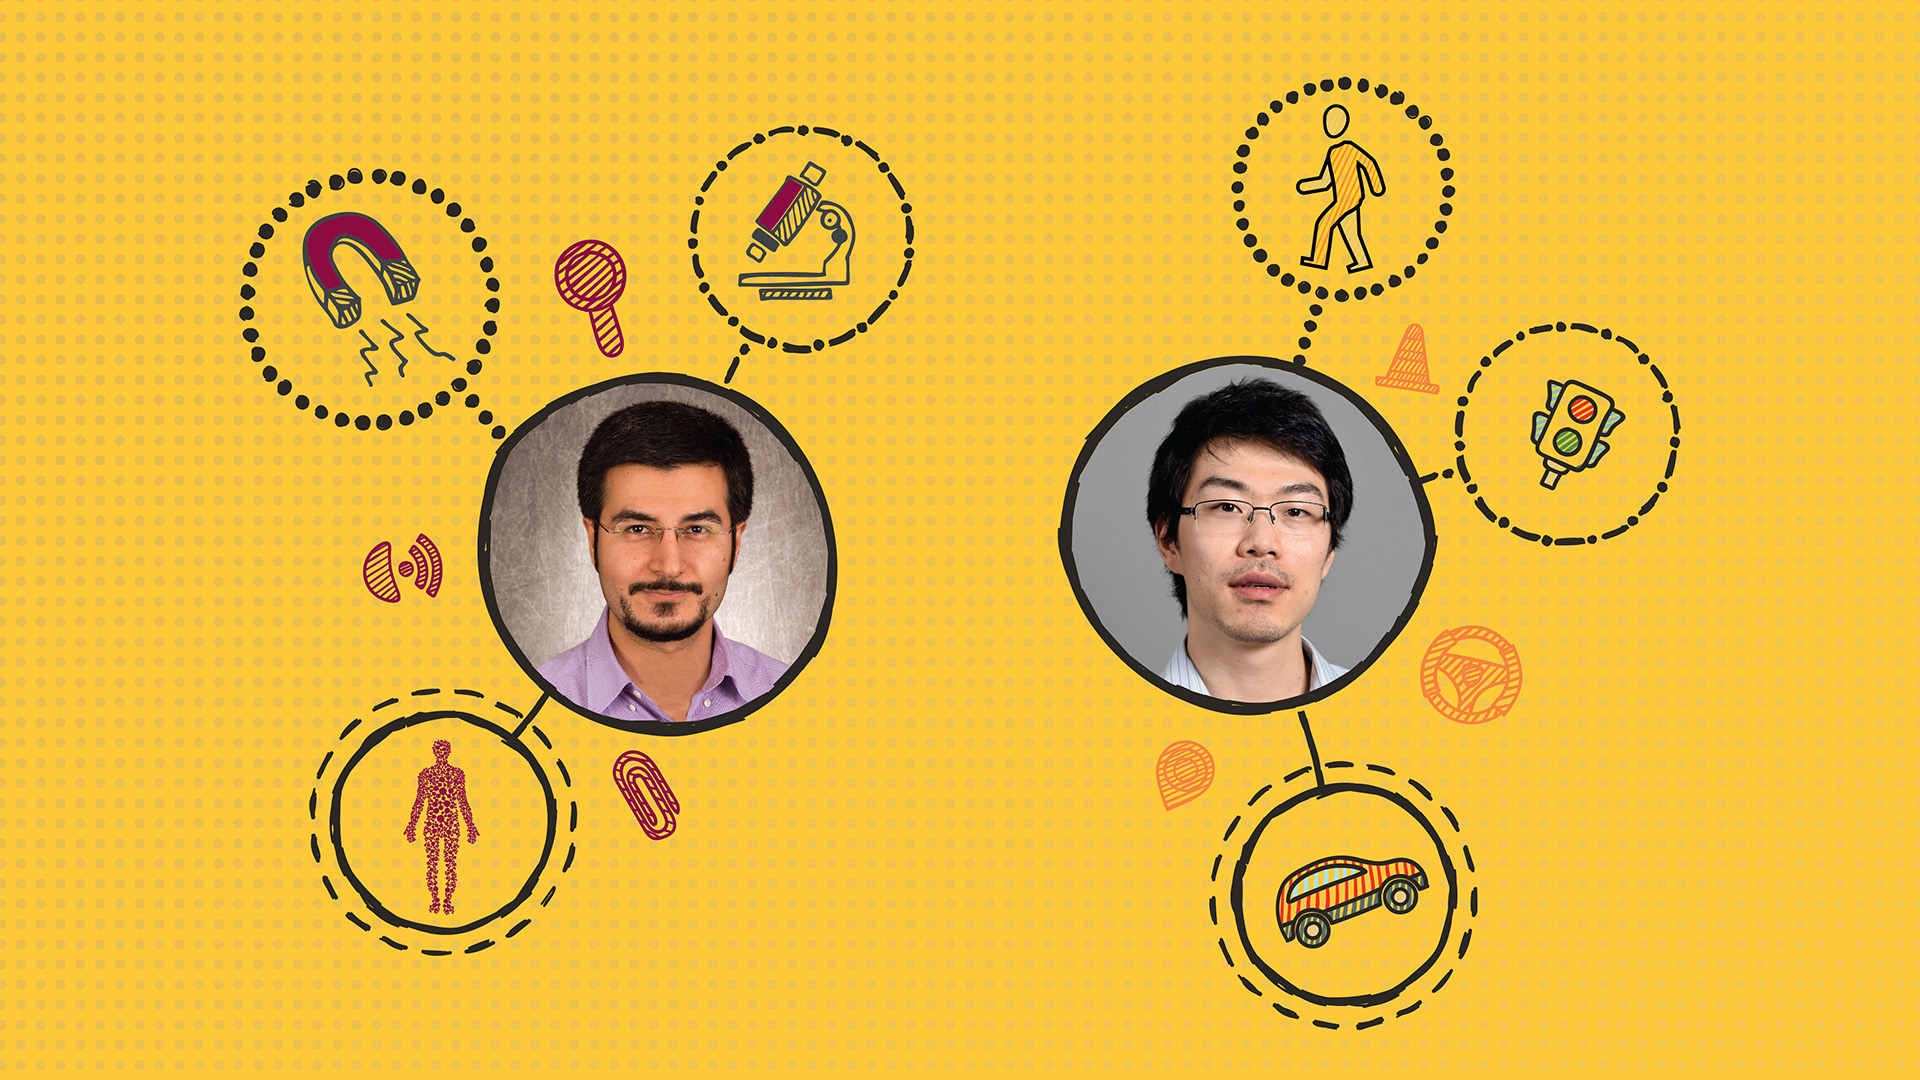 A graphic depicting Ira A. Fulton Schools of Engineering faculty members Hamid Marvi and Yezhou “YZ” Yang along with imagery representing their entrepreneurial ventures.